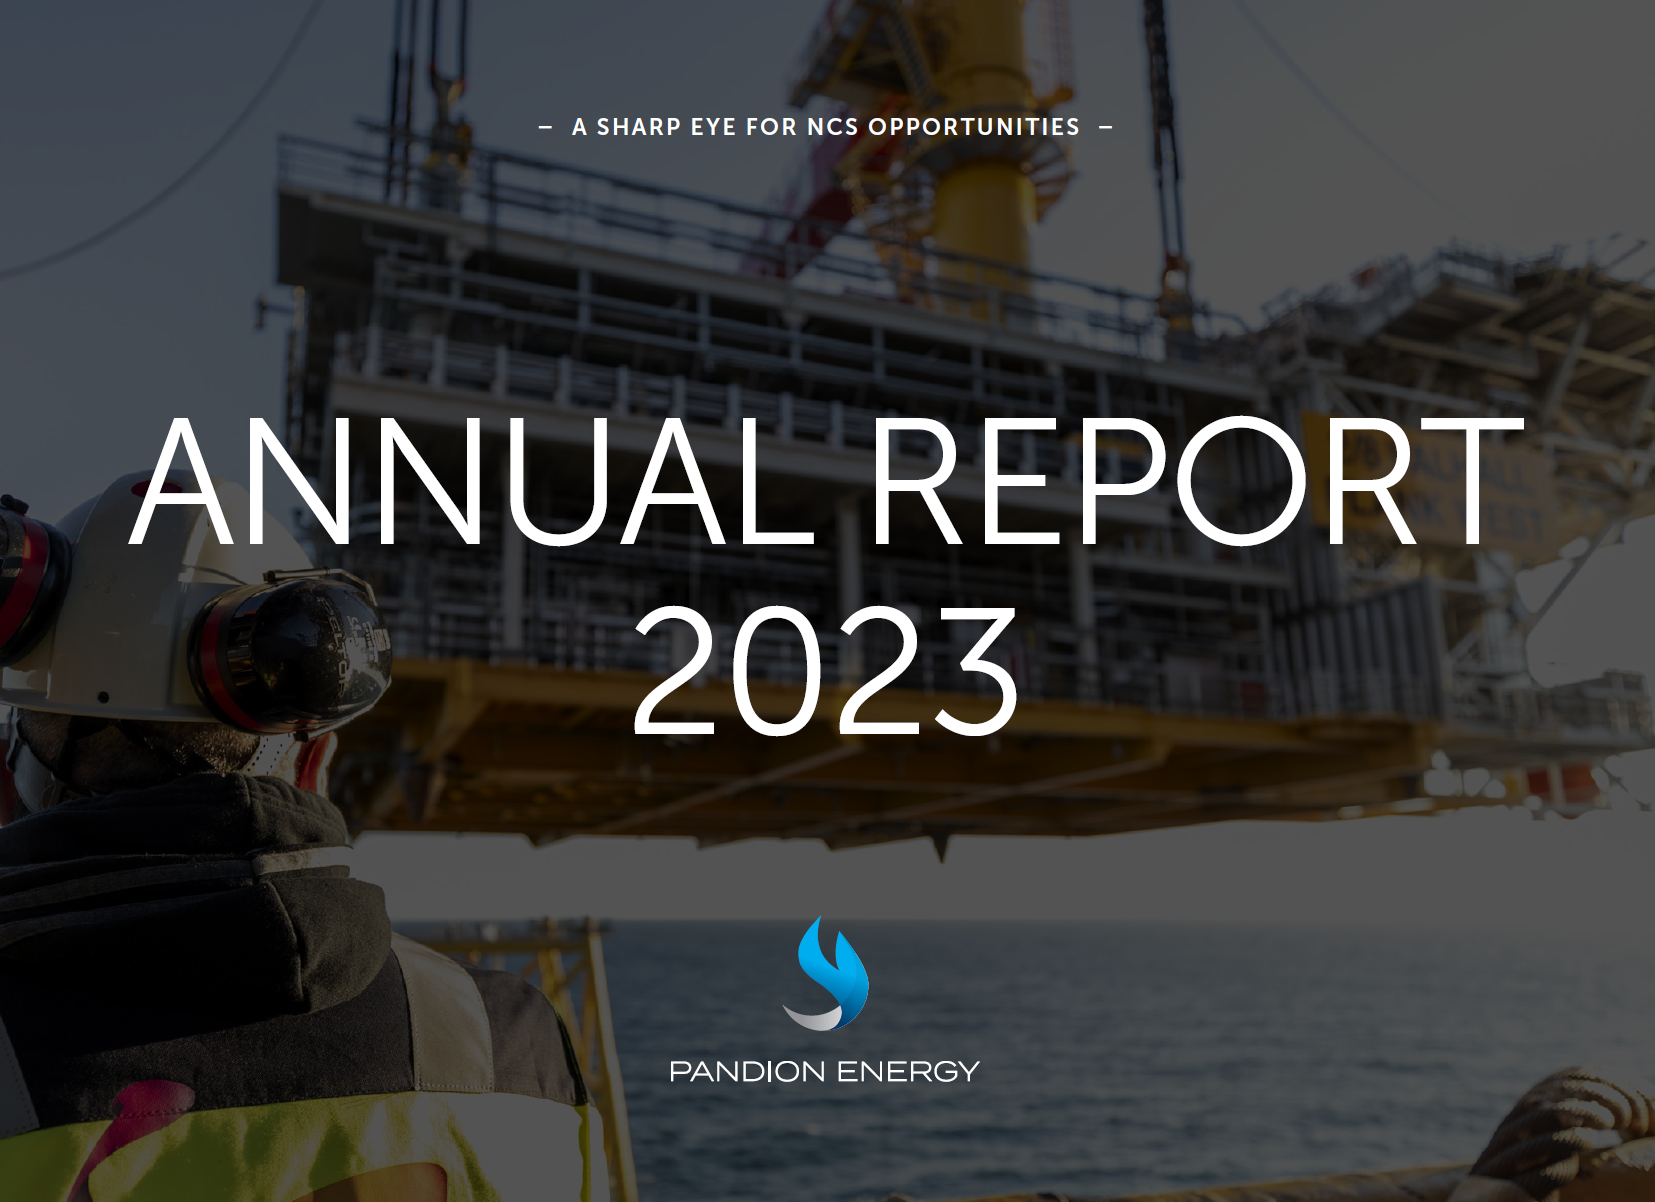 Publication of the combined annual report for 2023